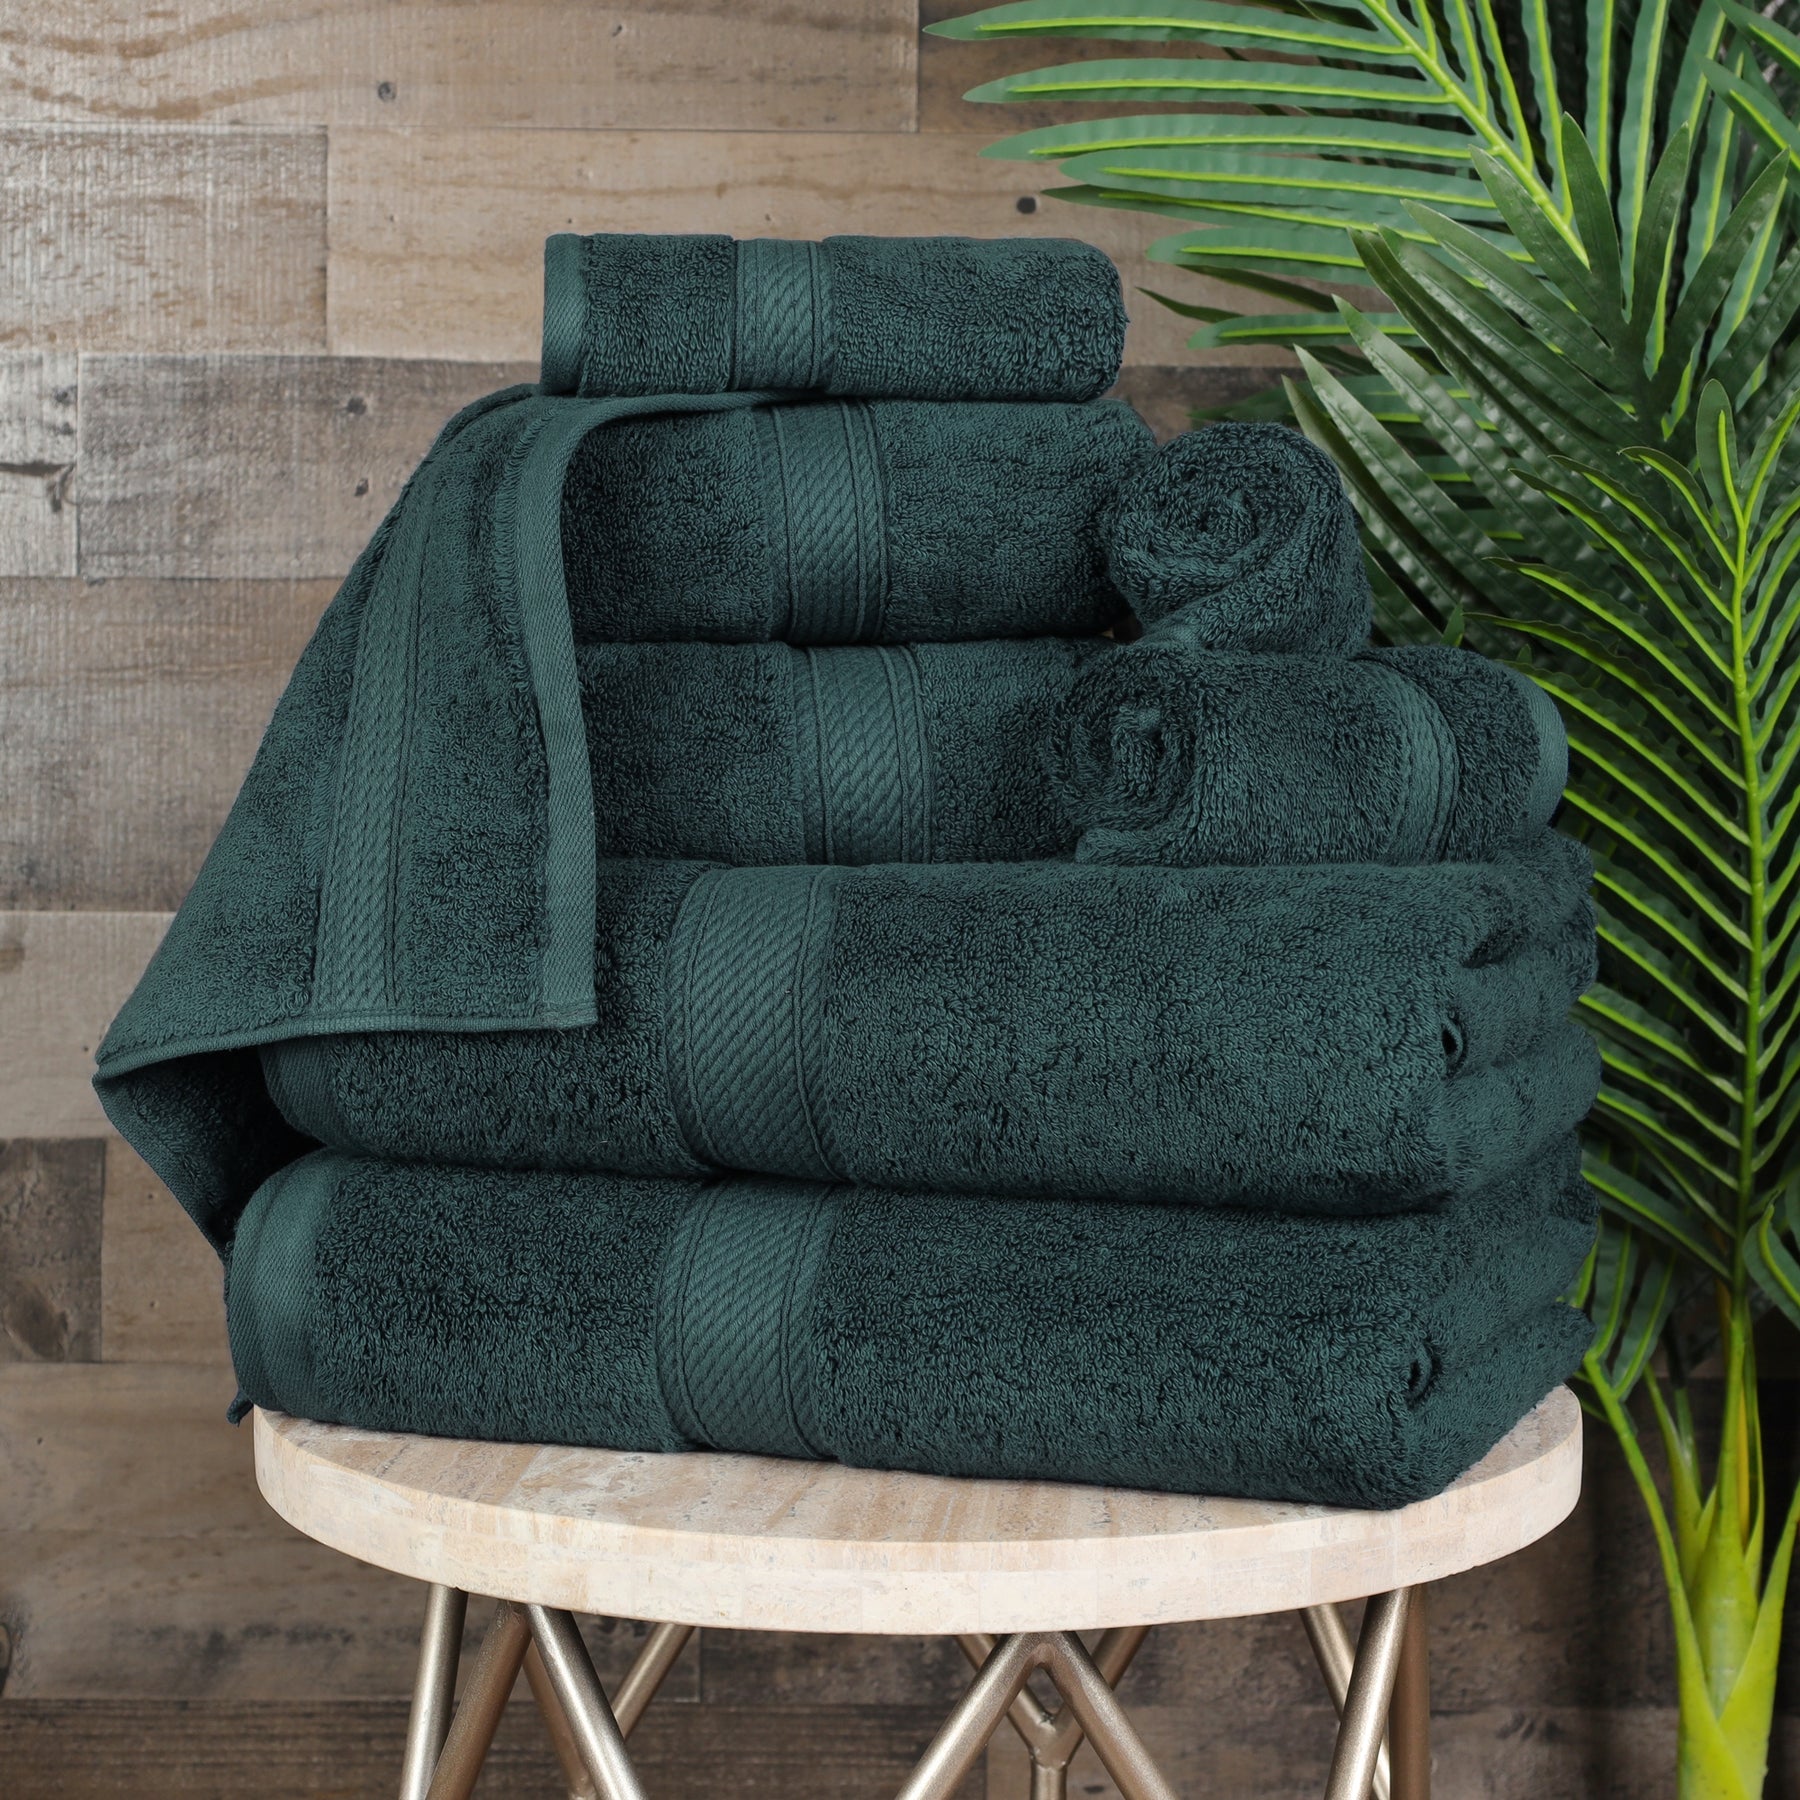 Solid Luxury Premium Cotton 800 GSM Highly Absorbent 6 Piece Bathroom Towel  Set, Forest Green by Blue Nile Mills